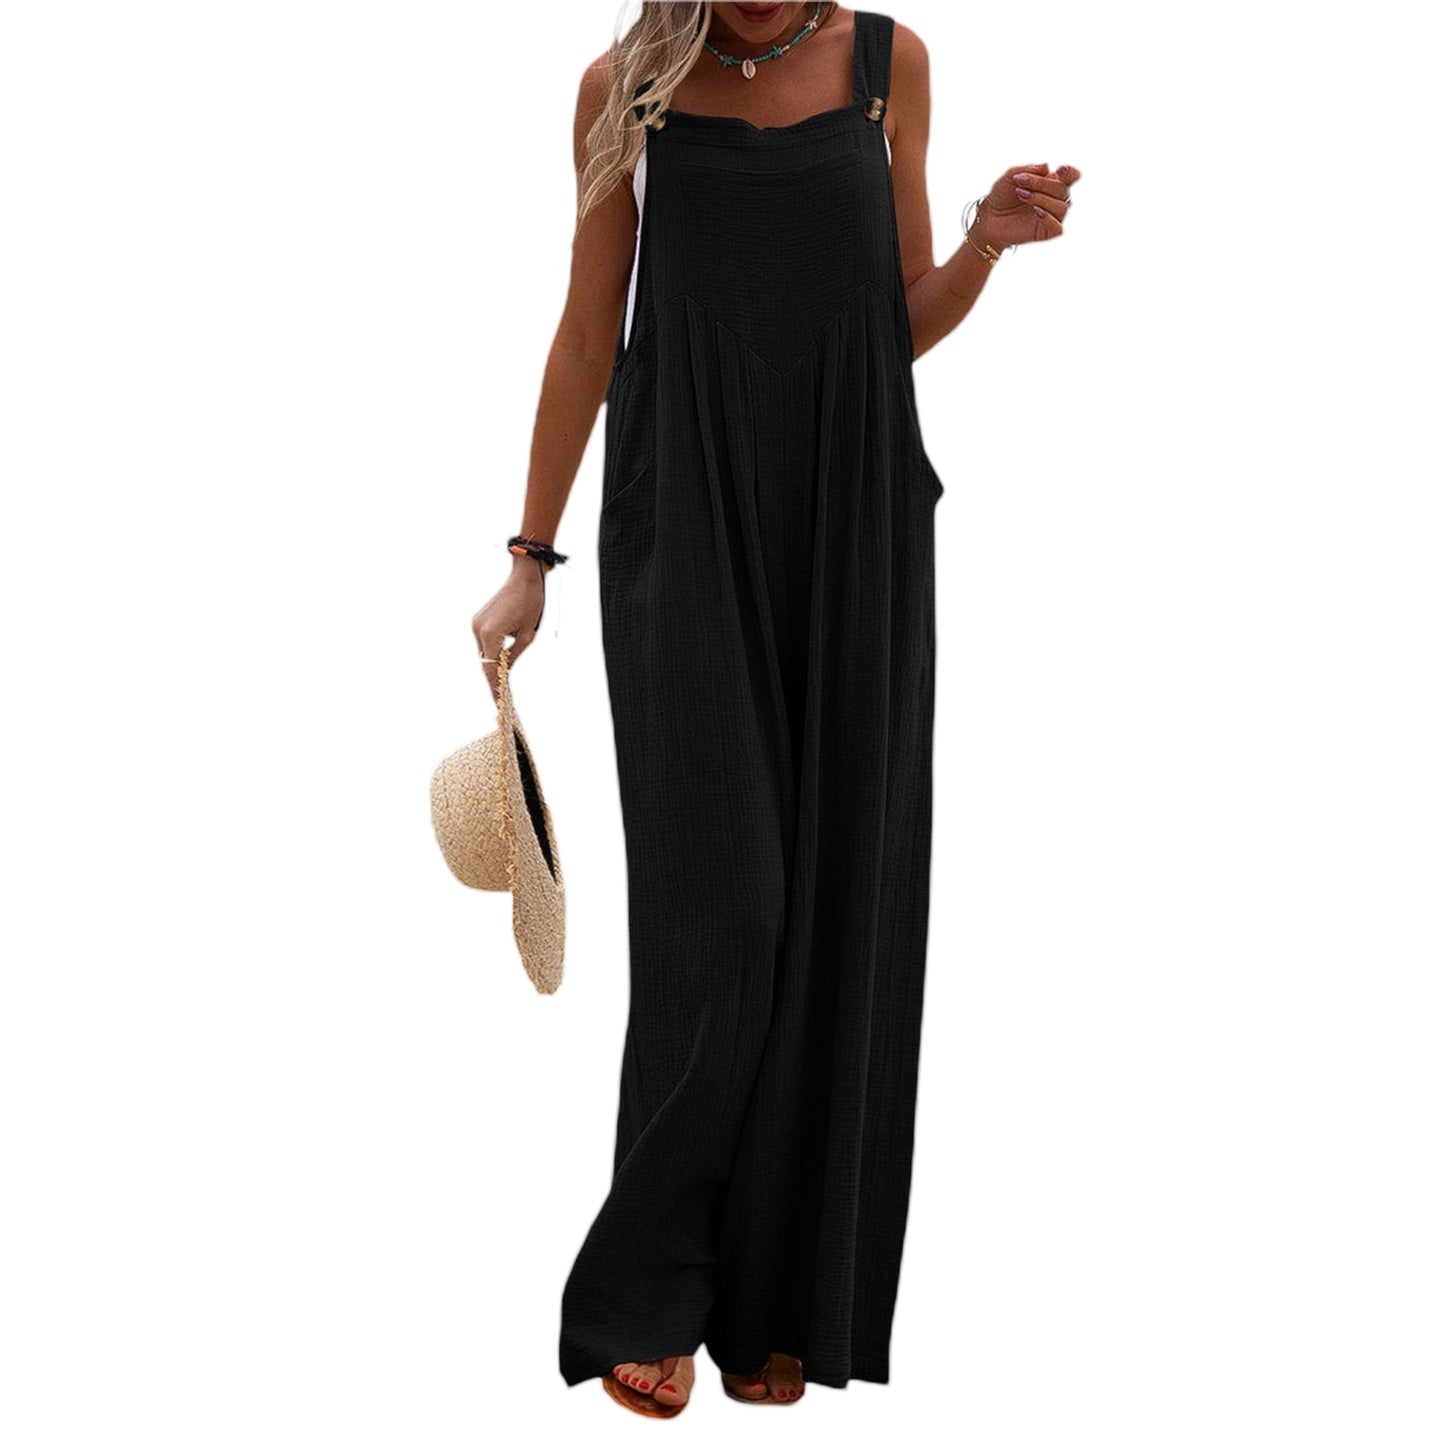 The Traveling Roamer Overall One-piece Jumpsuit